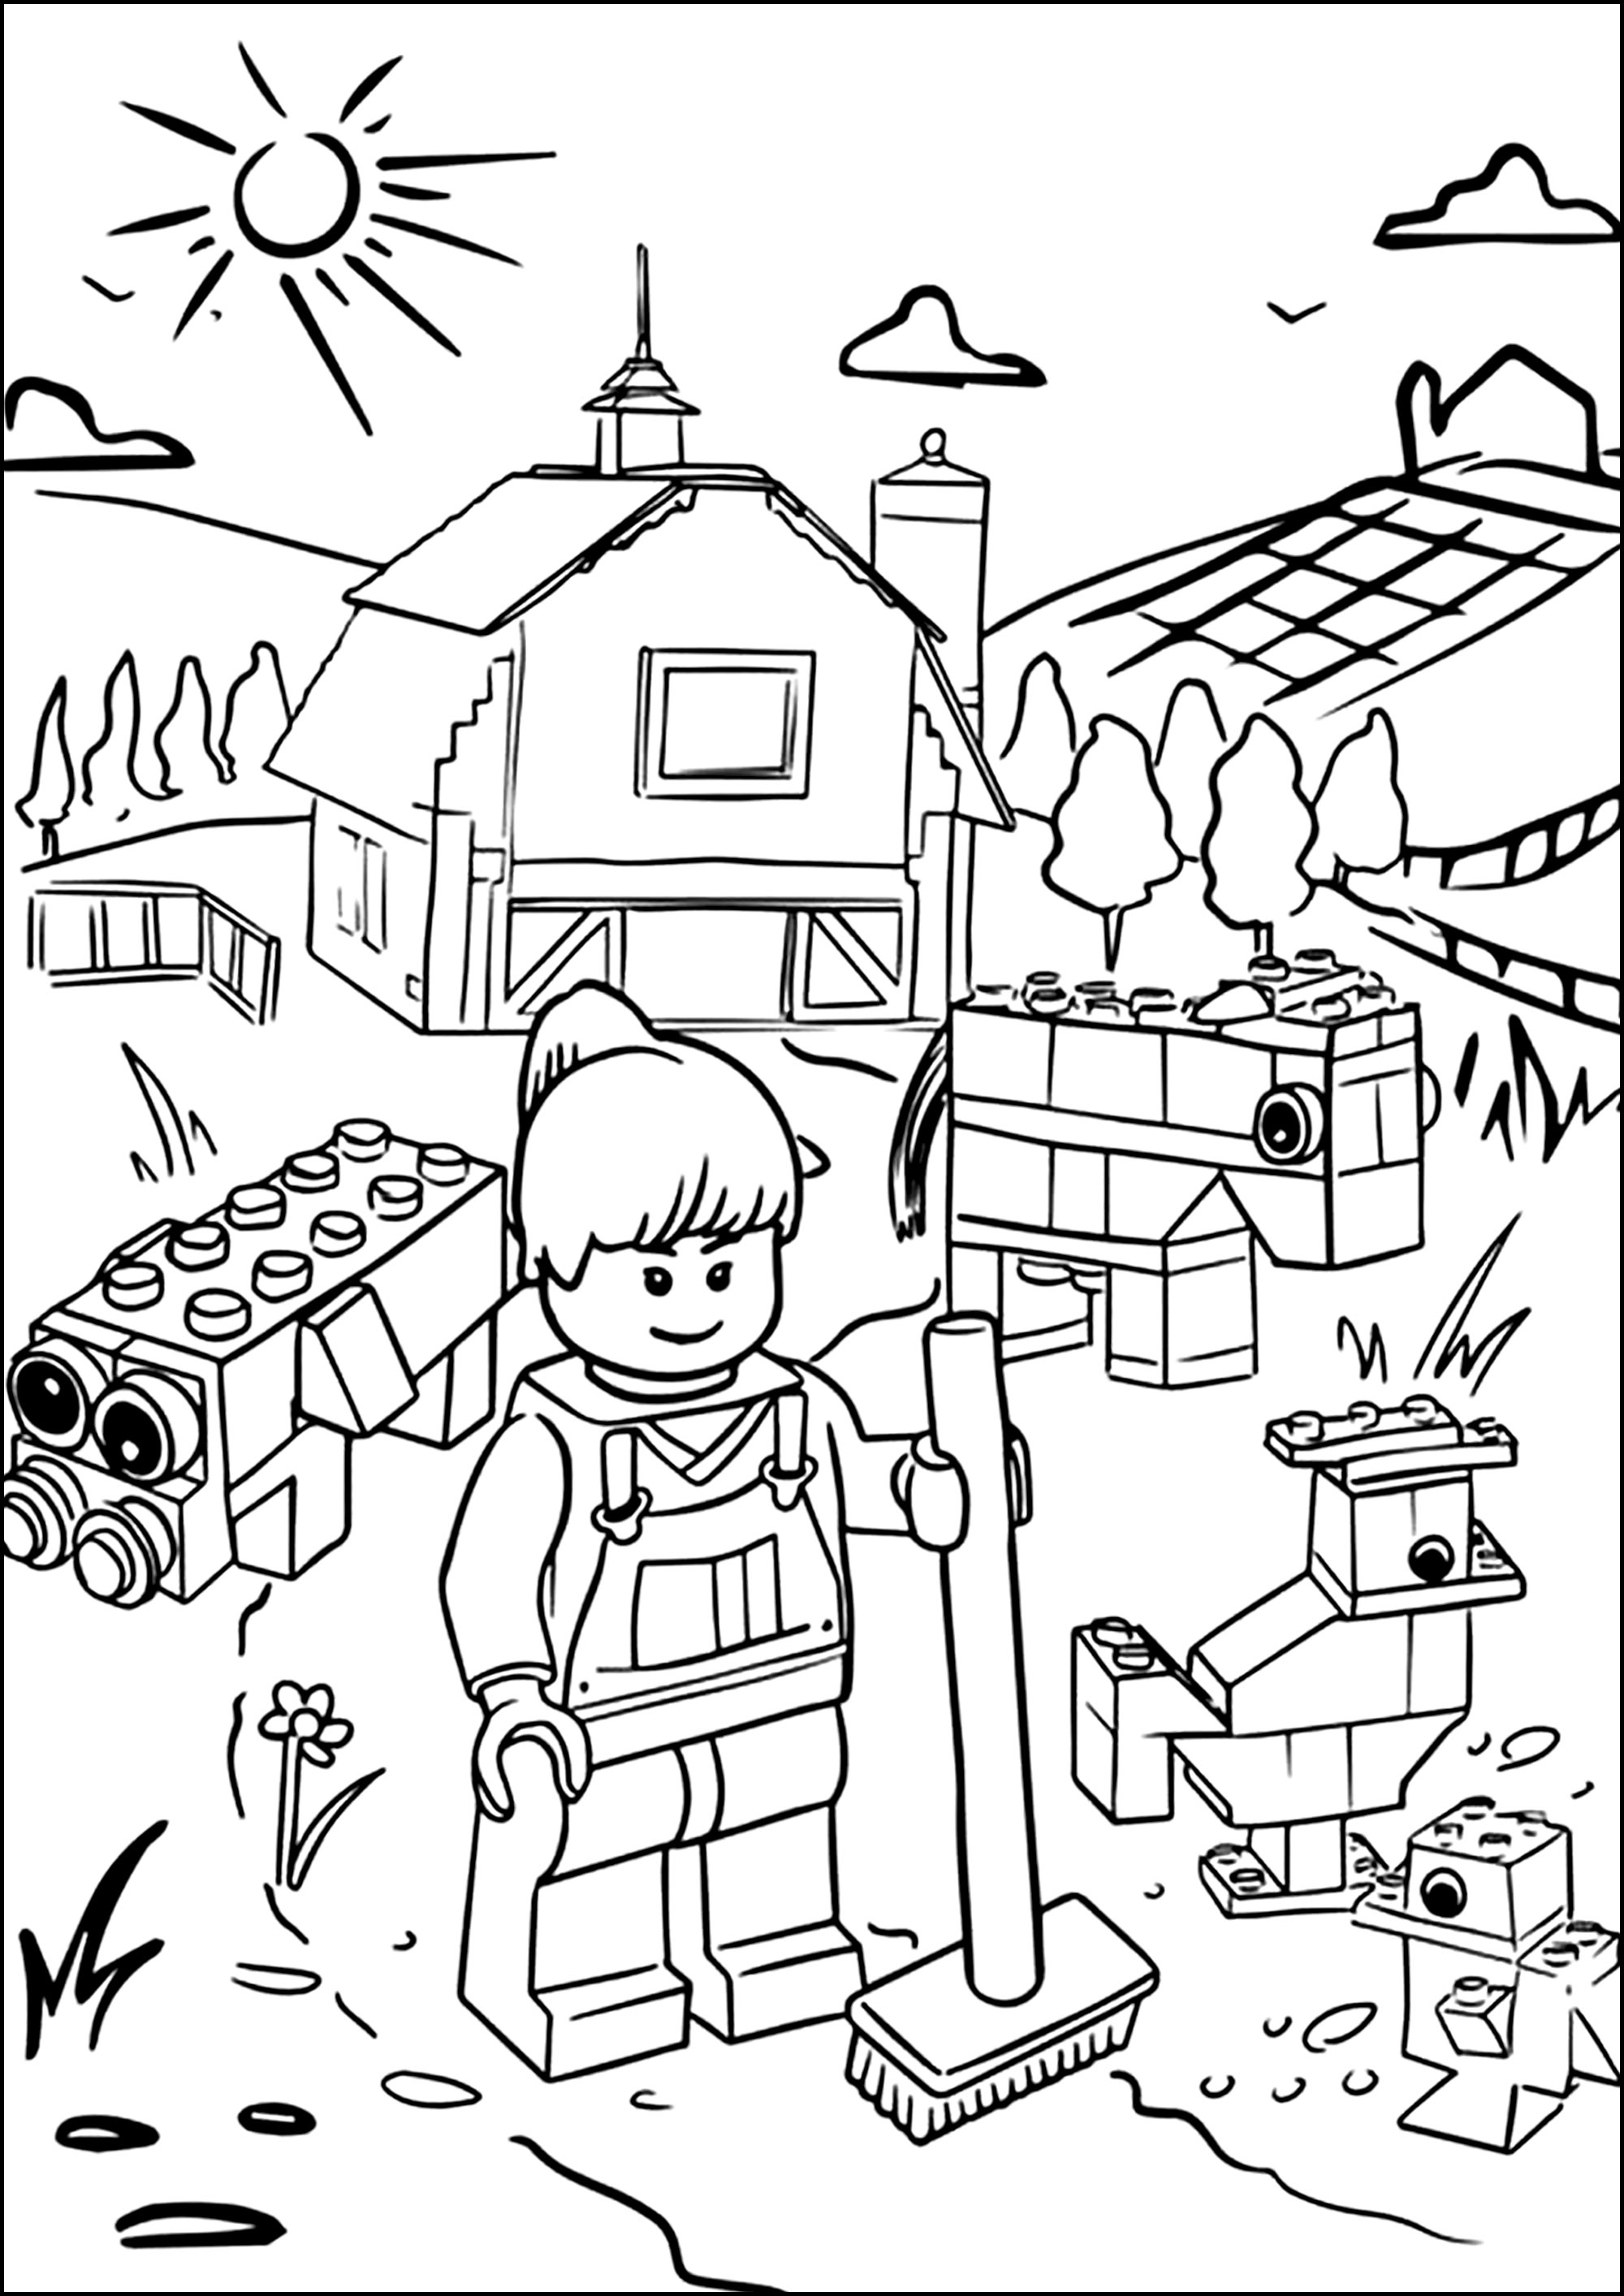 Lego Farm - Lego Kids Coloring Pages